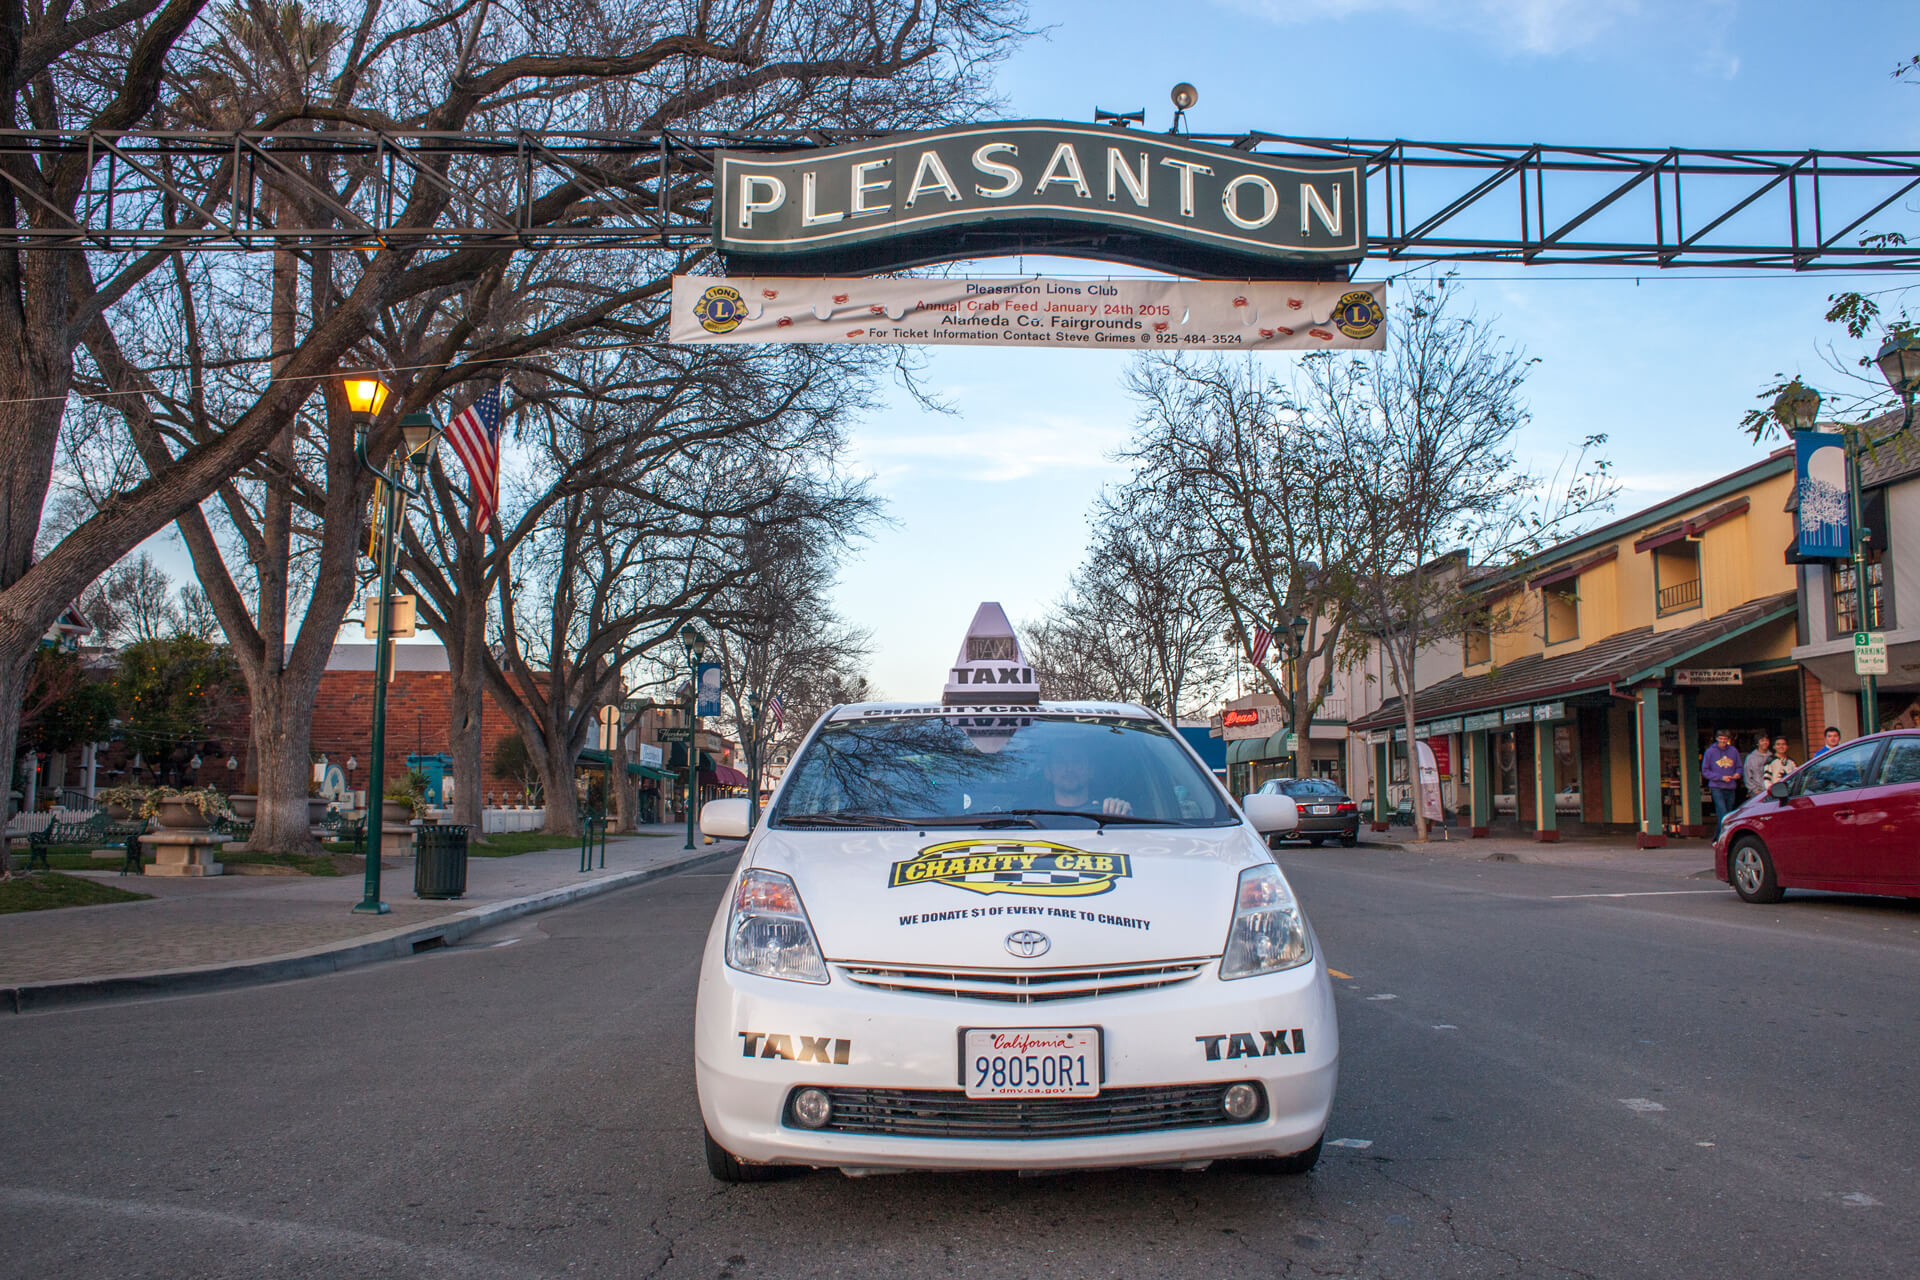 charity cab is your choice for taxi after the wonderful downtown Pleasanton restaurants.